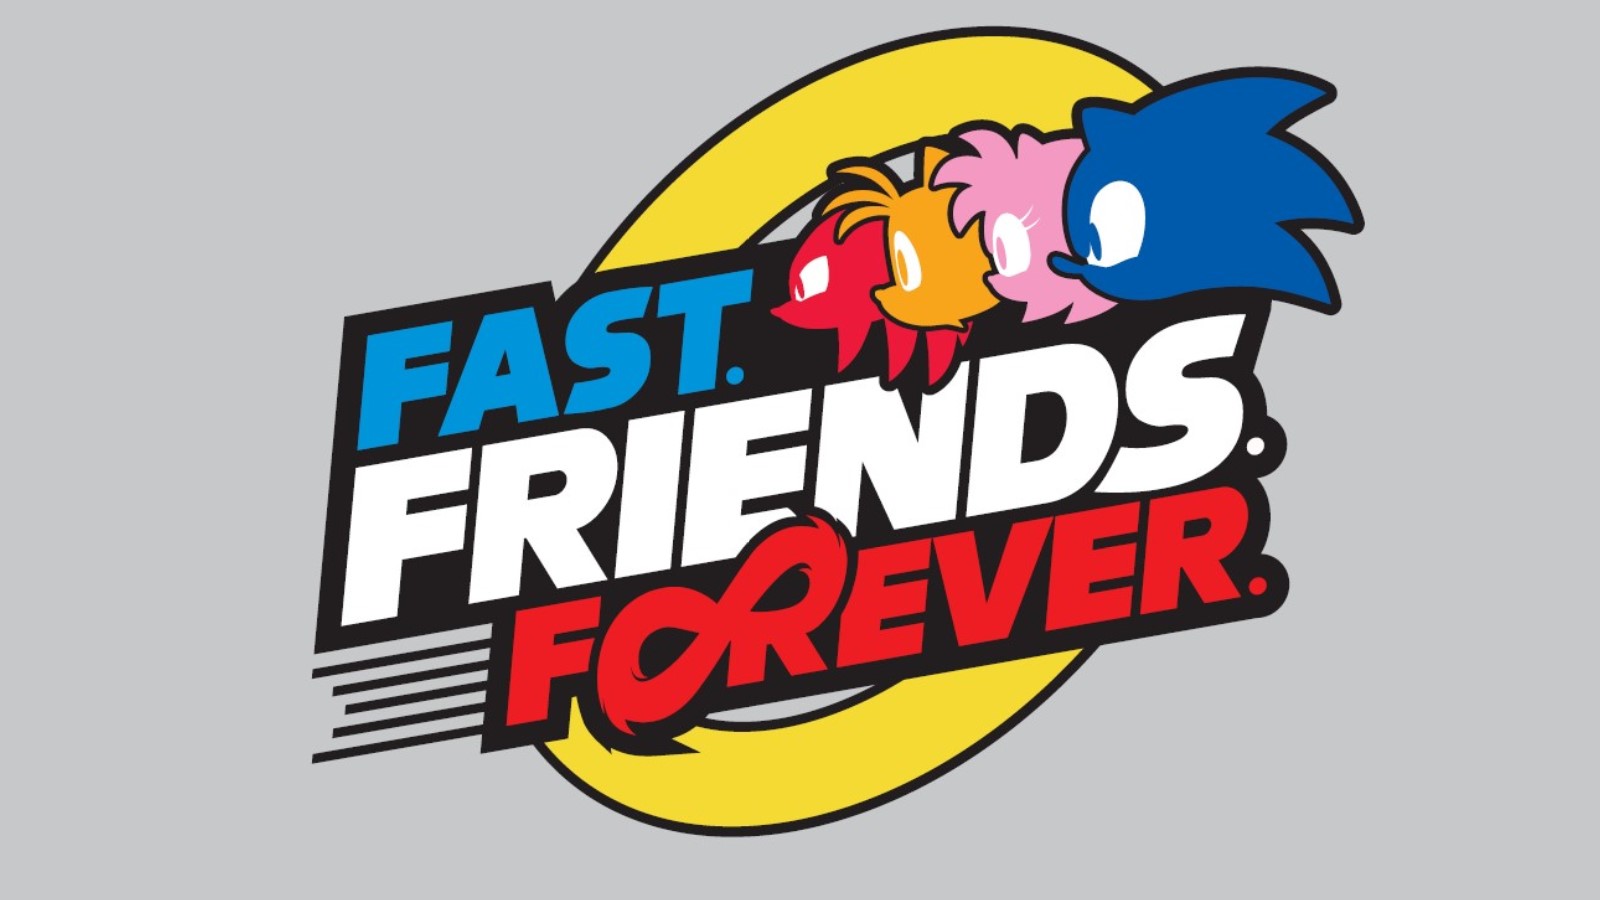 FAST FRIENDS FOREVER - Sonic the Hedgehog